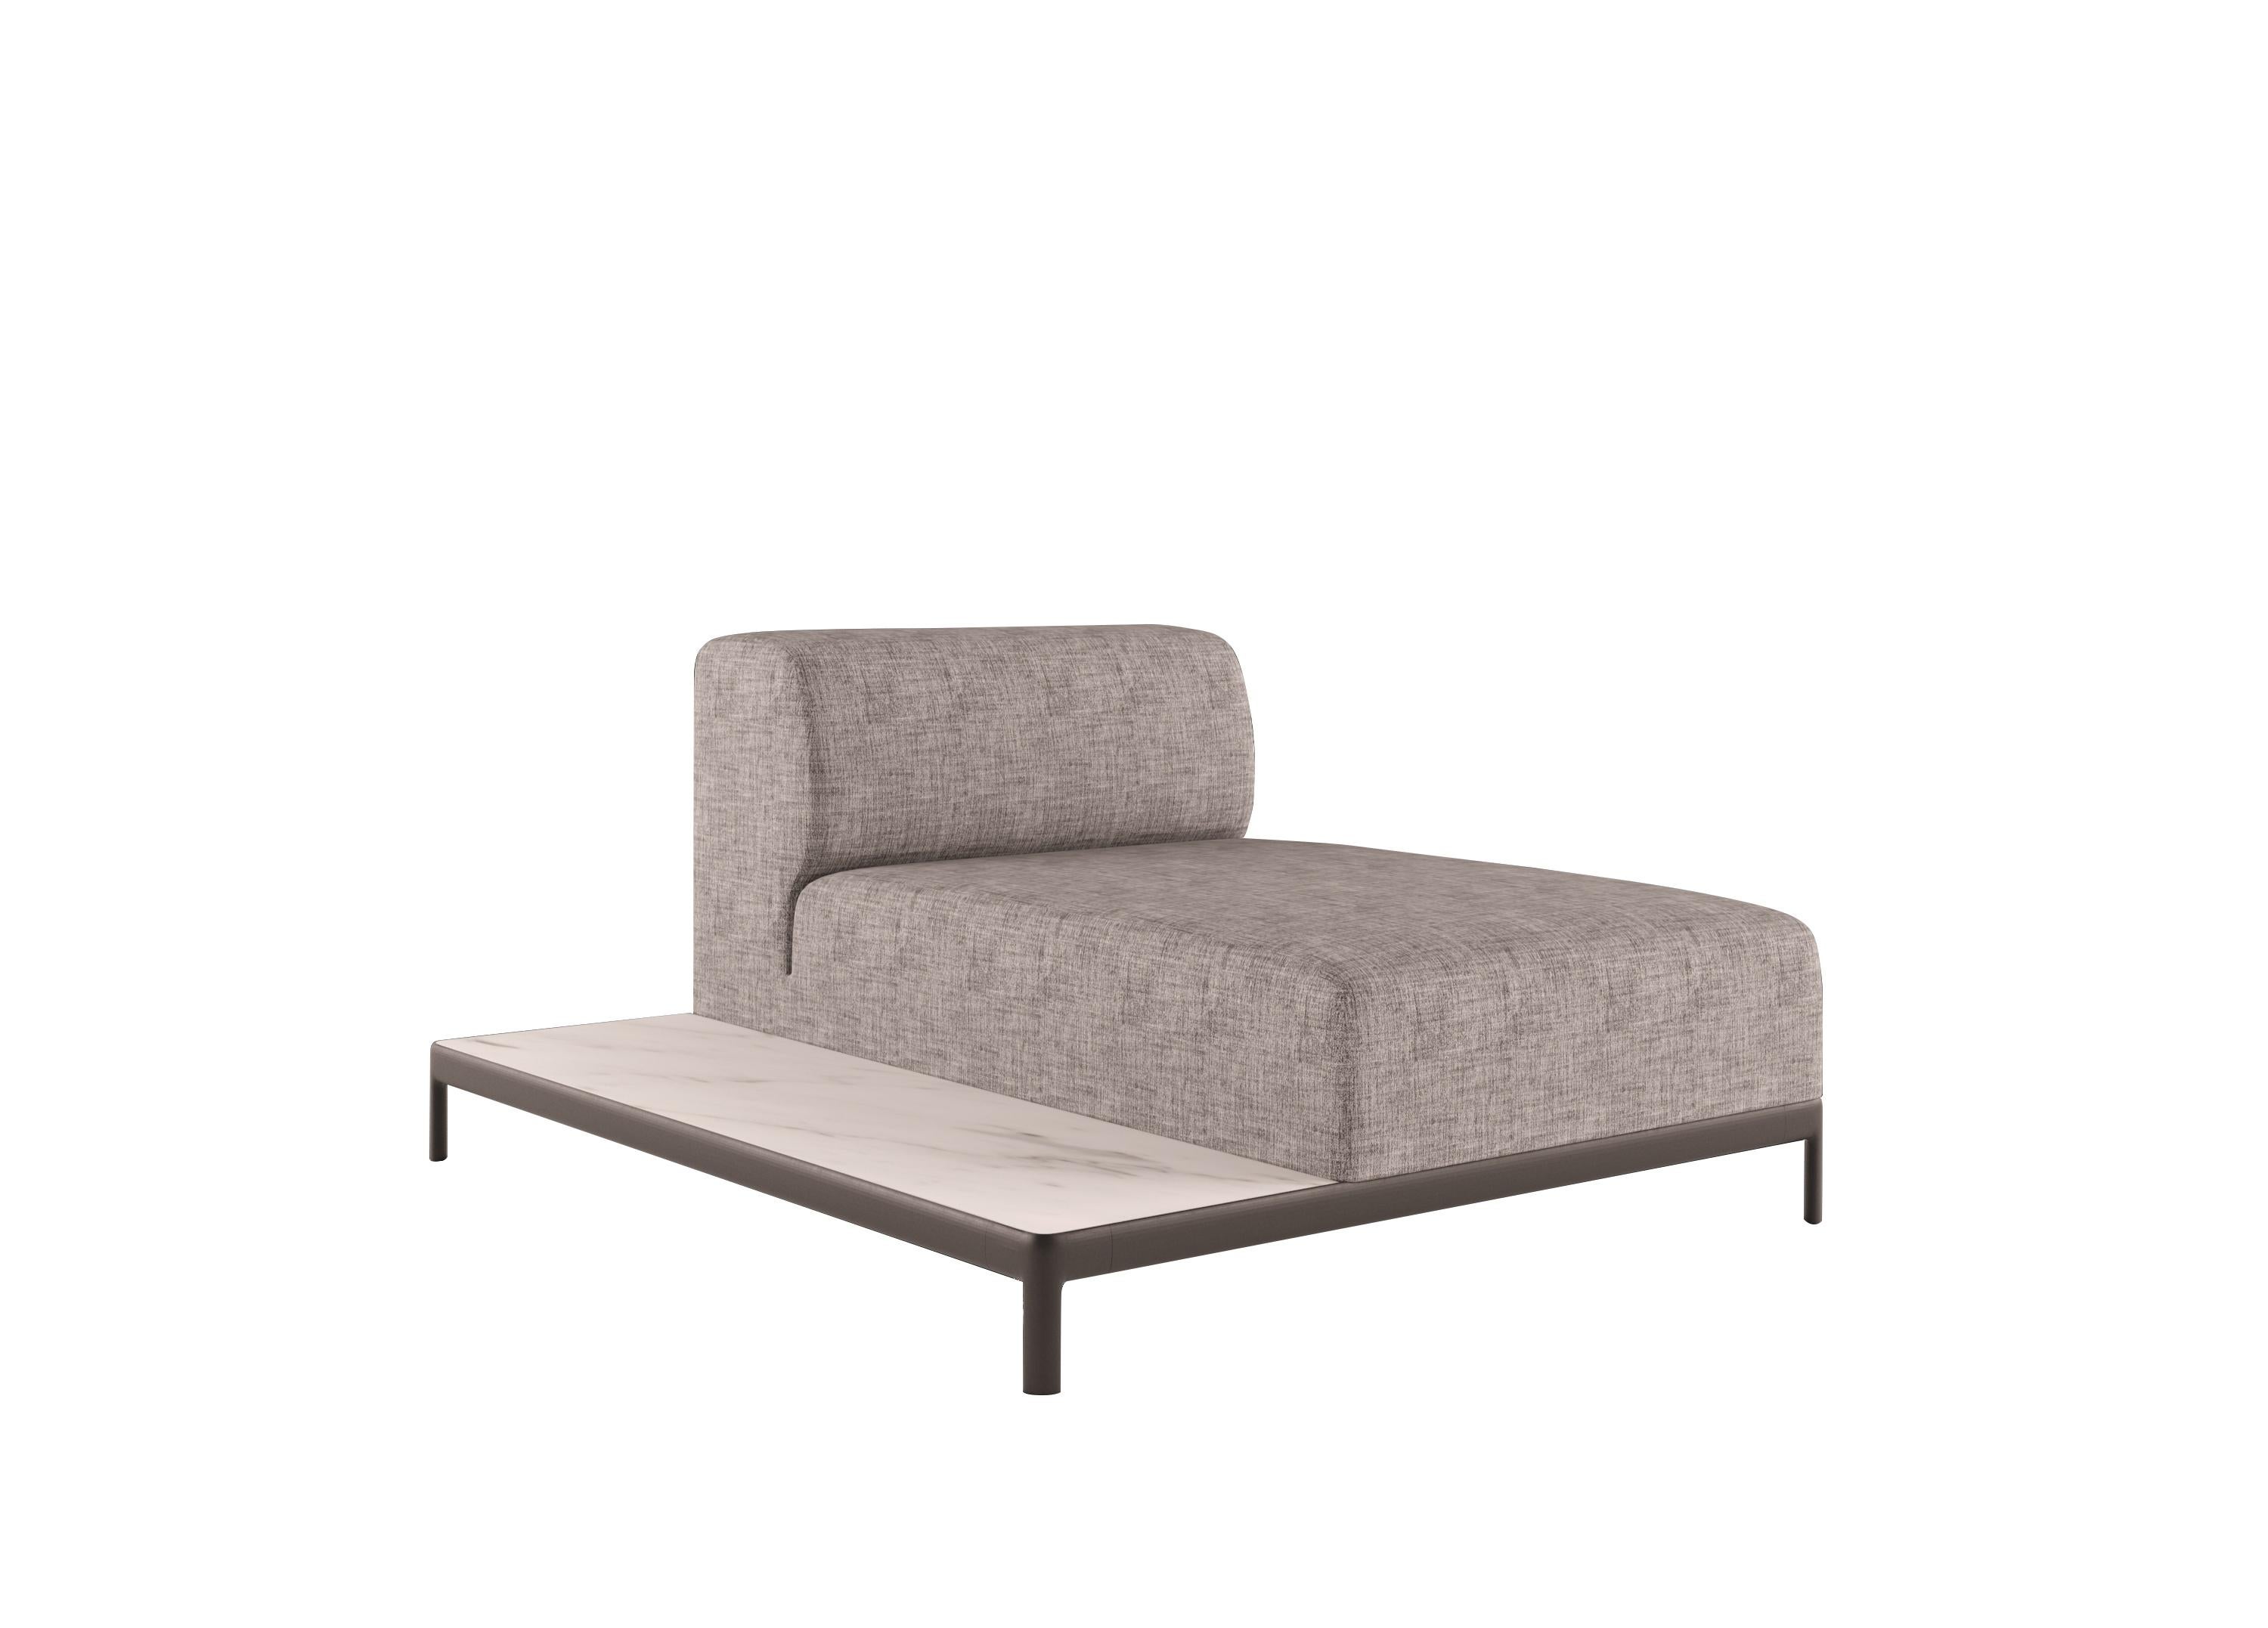 Alias P46 AluZen Soft Top Sofa with Upholstery and Lacquered Aluminum Frame by Ludovica+Roberto Palomba

Modular element with top in oak veneered plywood; structure in lacquered or polished aluminium.Seat and back with removable cover in fabric or